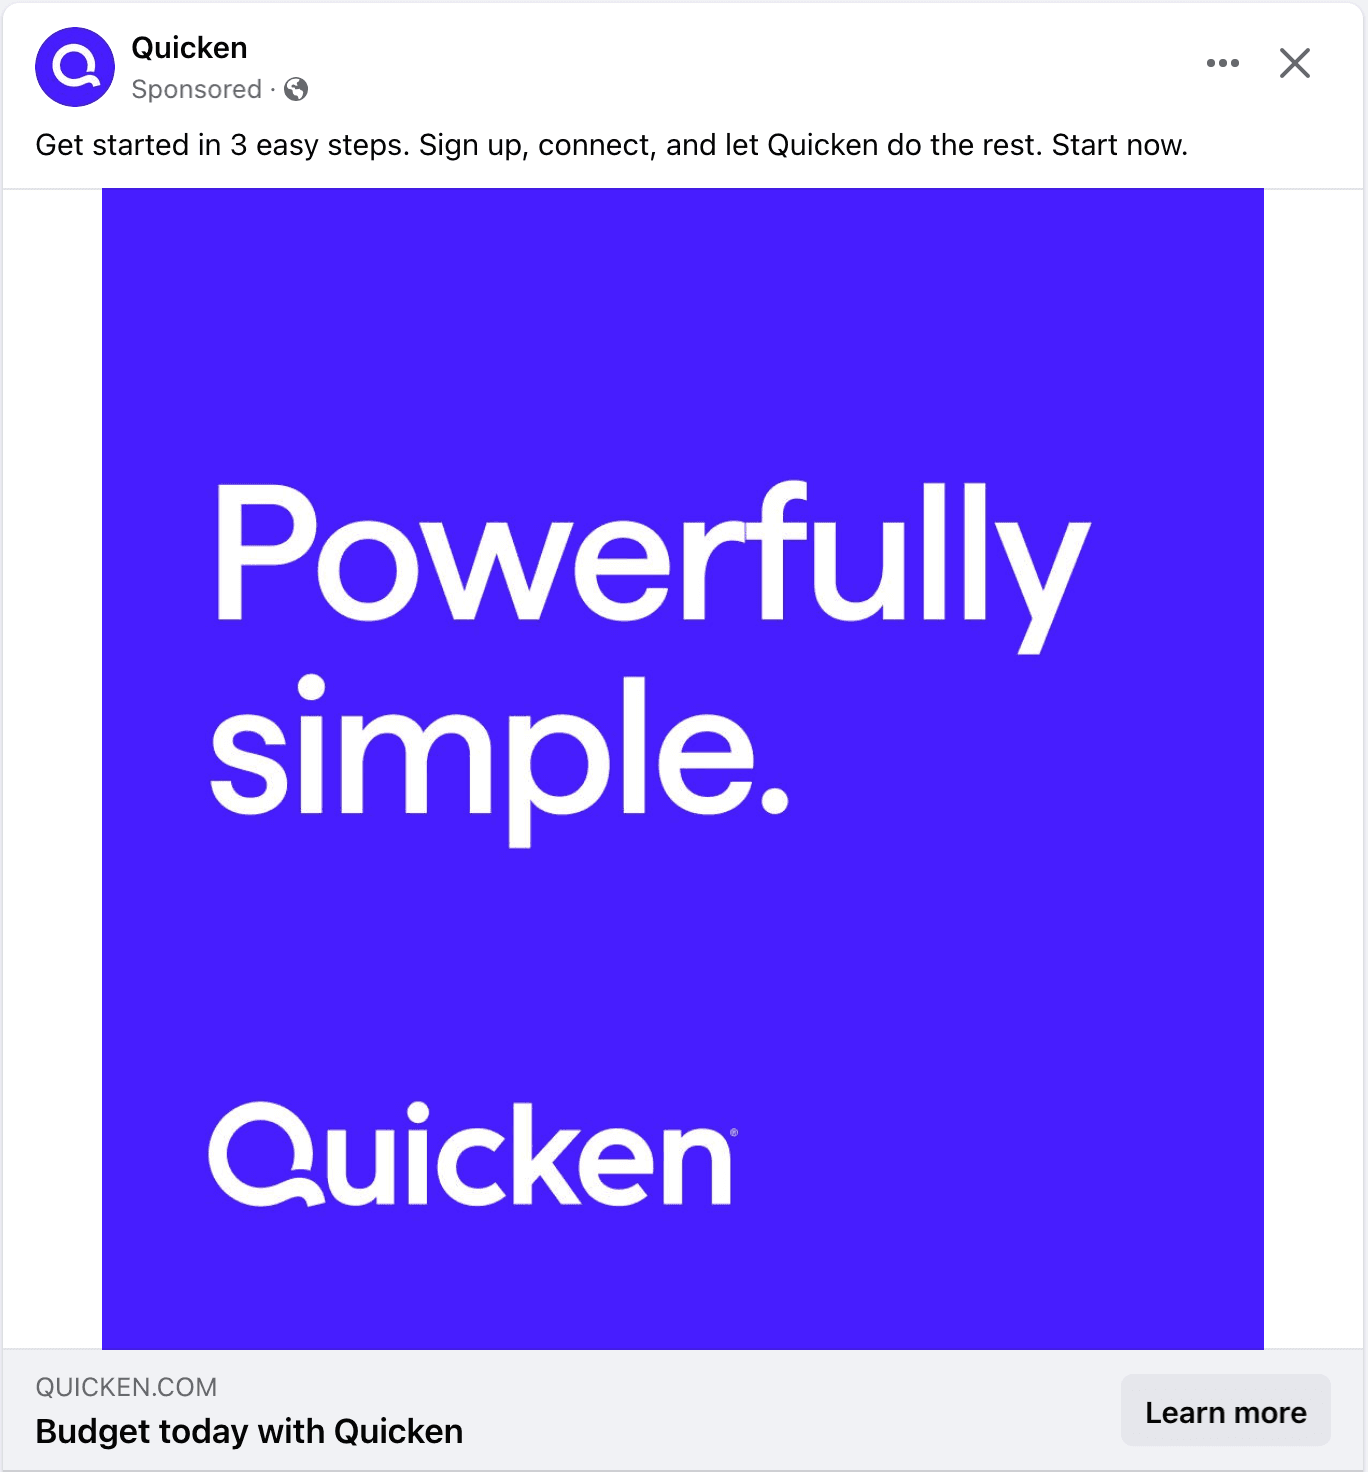 Quicken uses Facebook ads as marketing strategy example